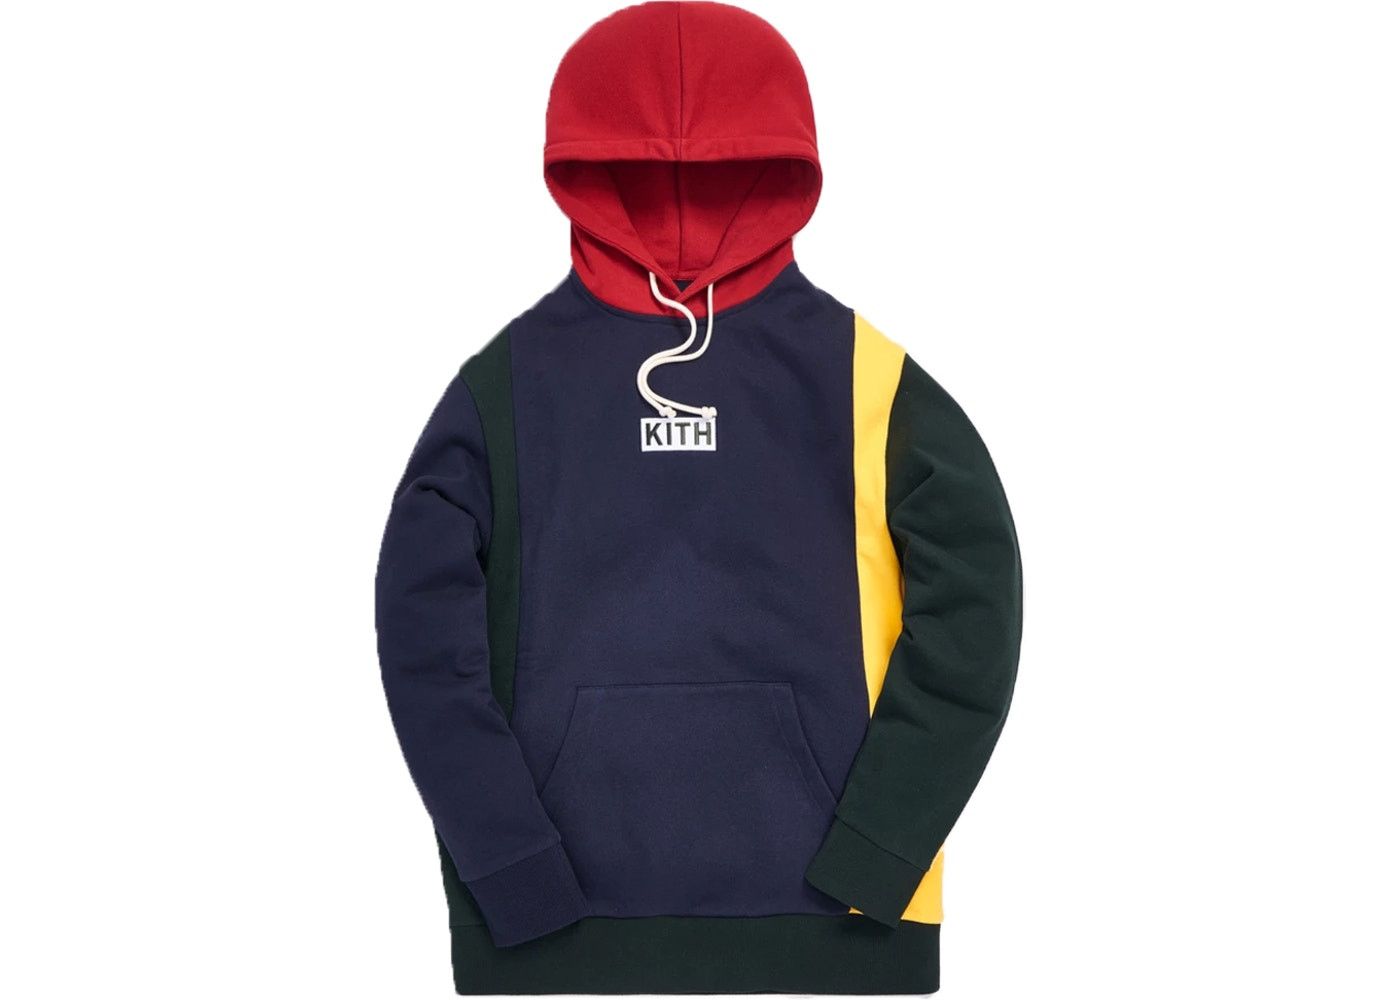 Kith Colorblocked Rugby Hoodie | Grailed